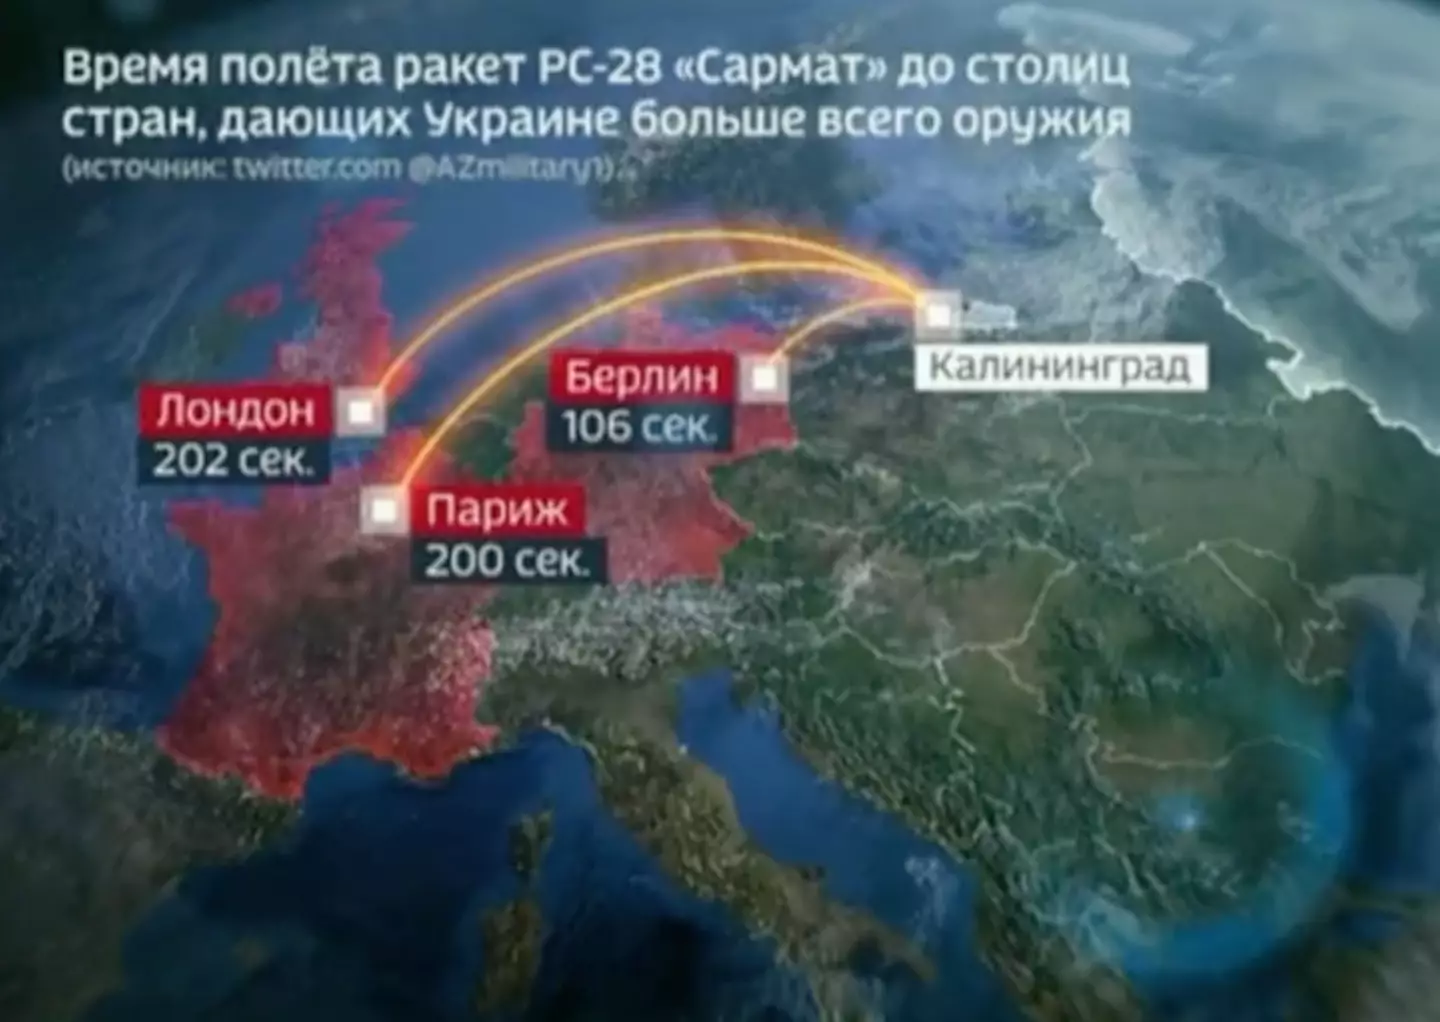 A simulation showing a nuclear attack on Europe was aired on Russian TV.